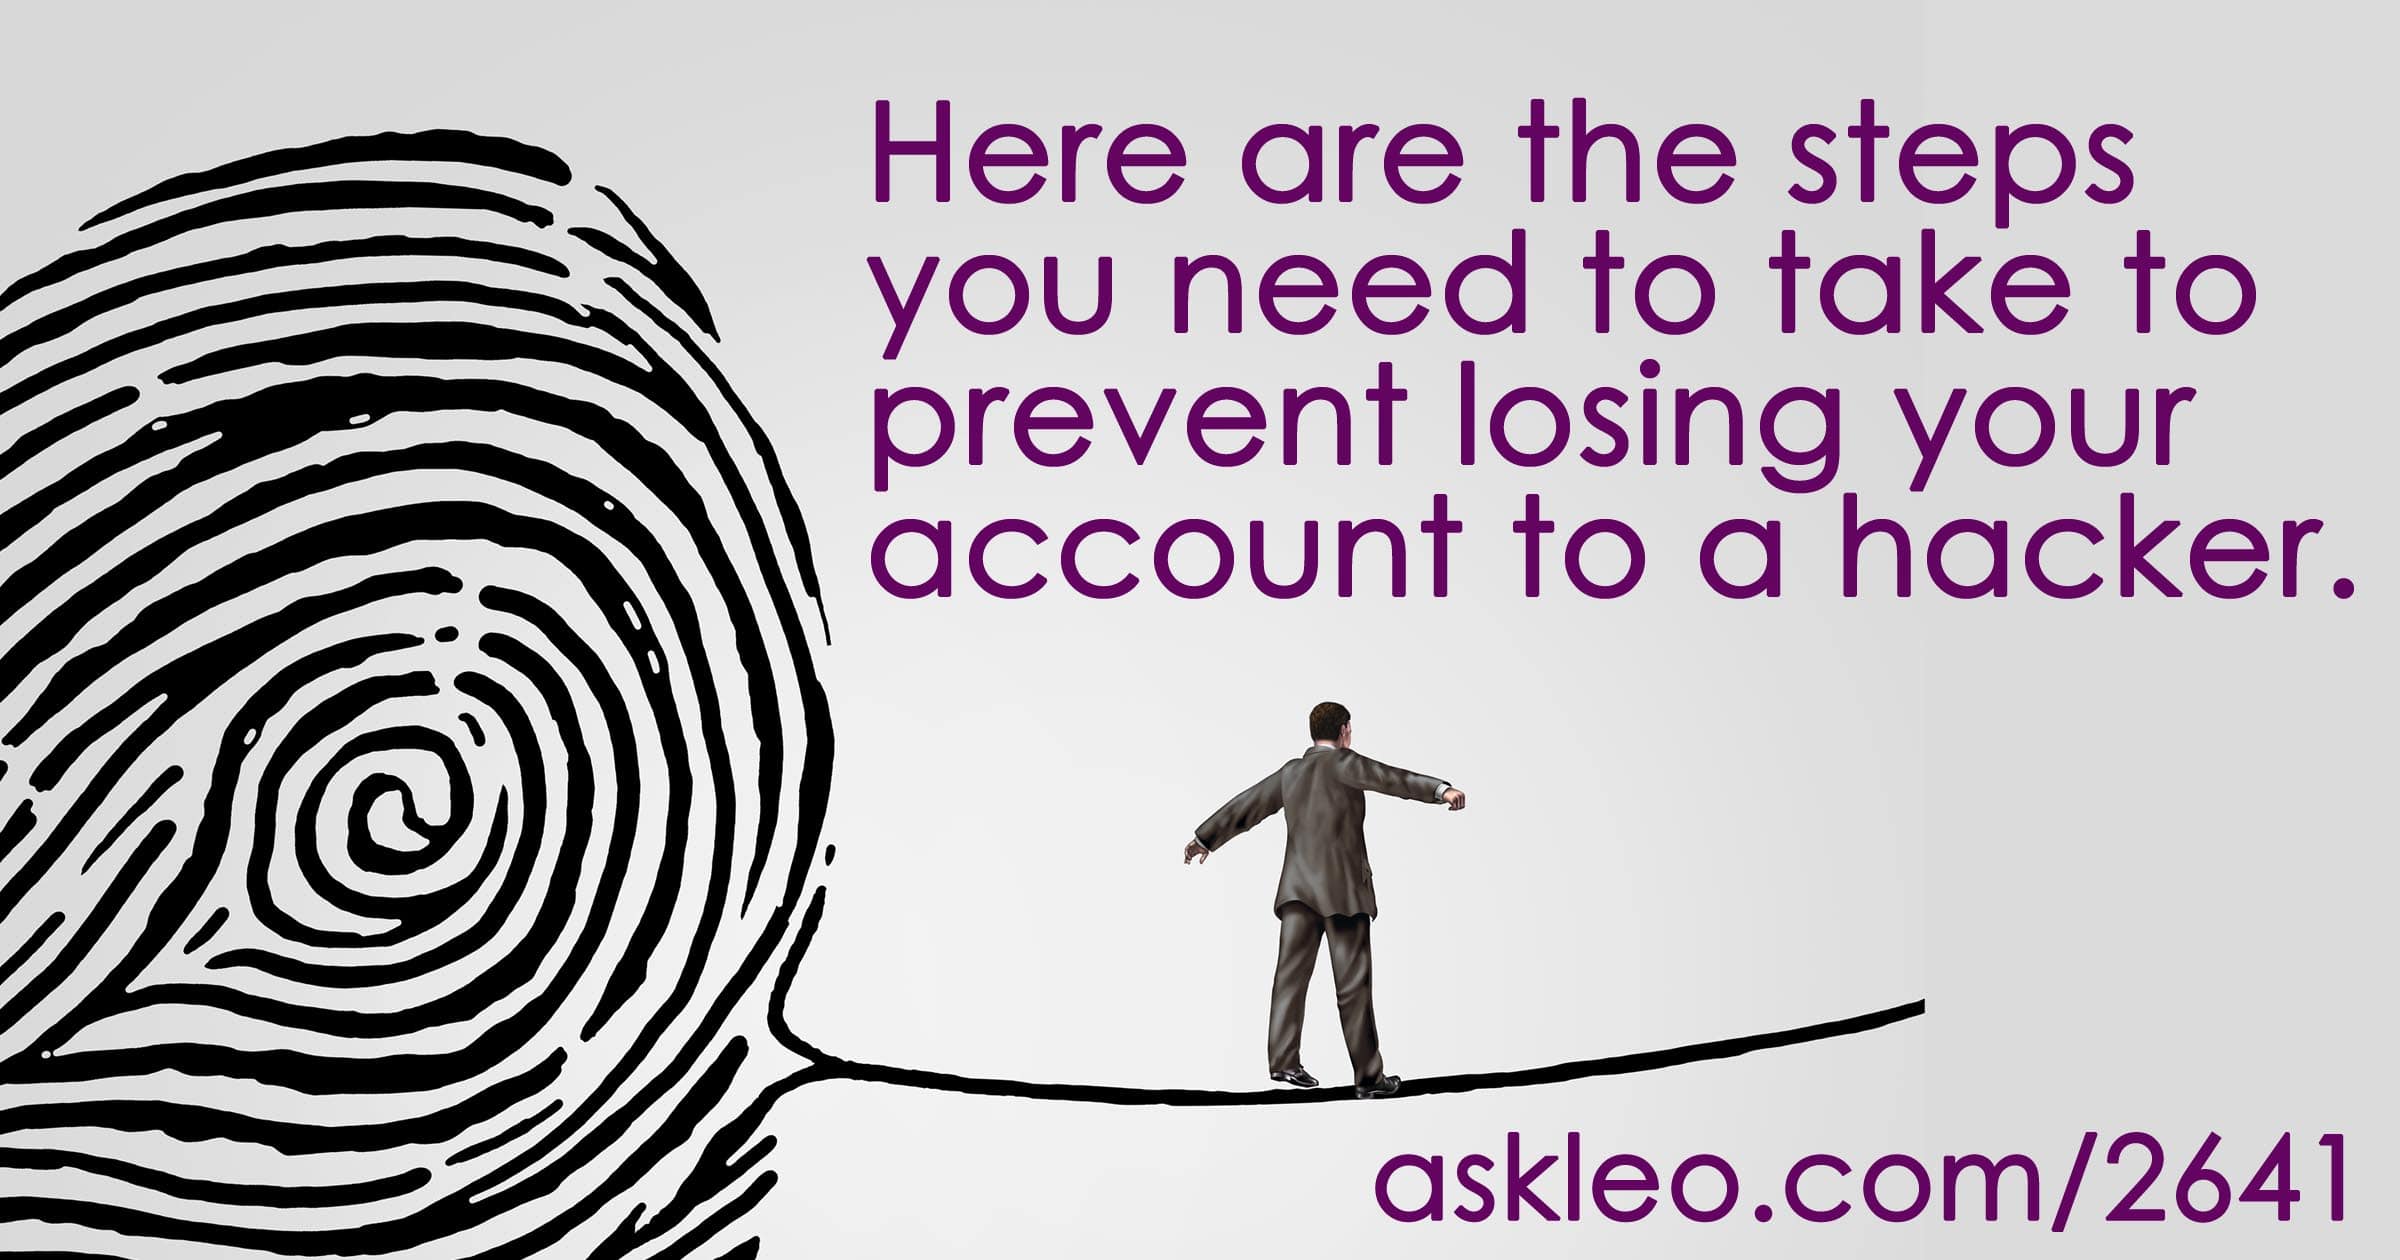 12 Steps To Keep From Getting Your Account Hacked Ask Leo